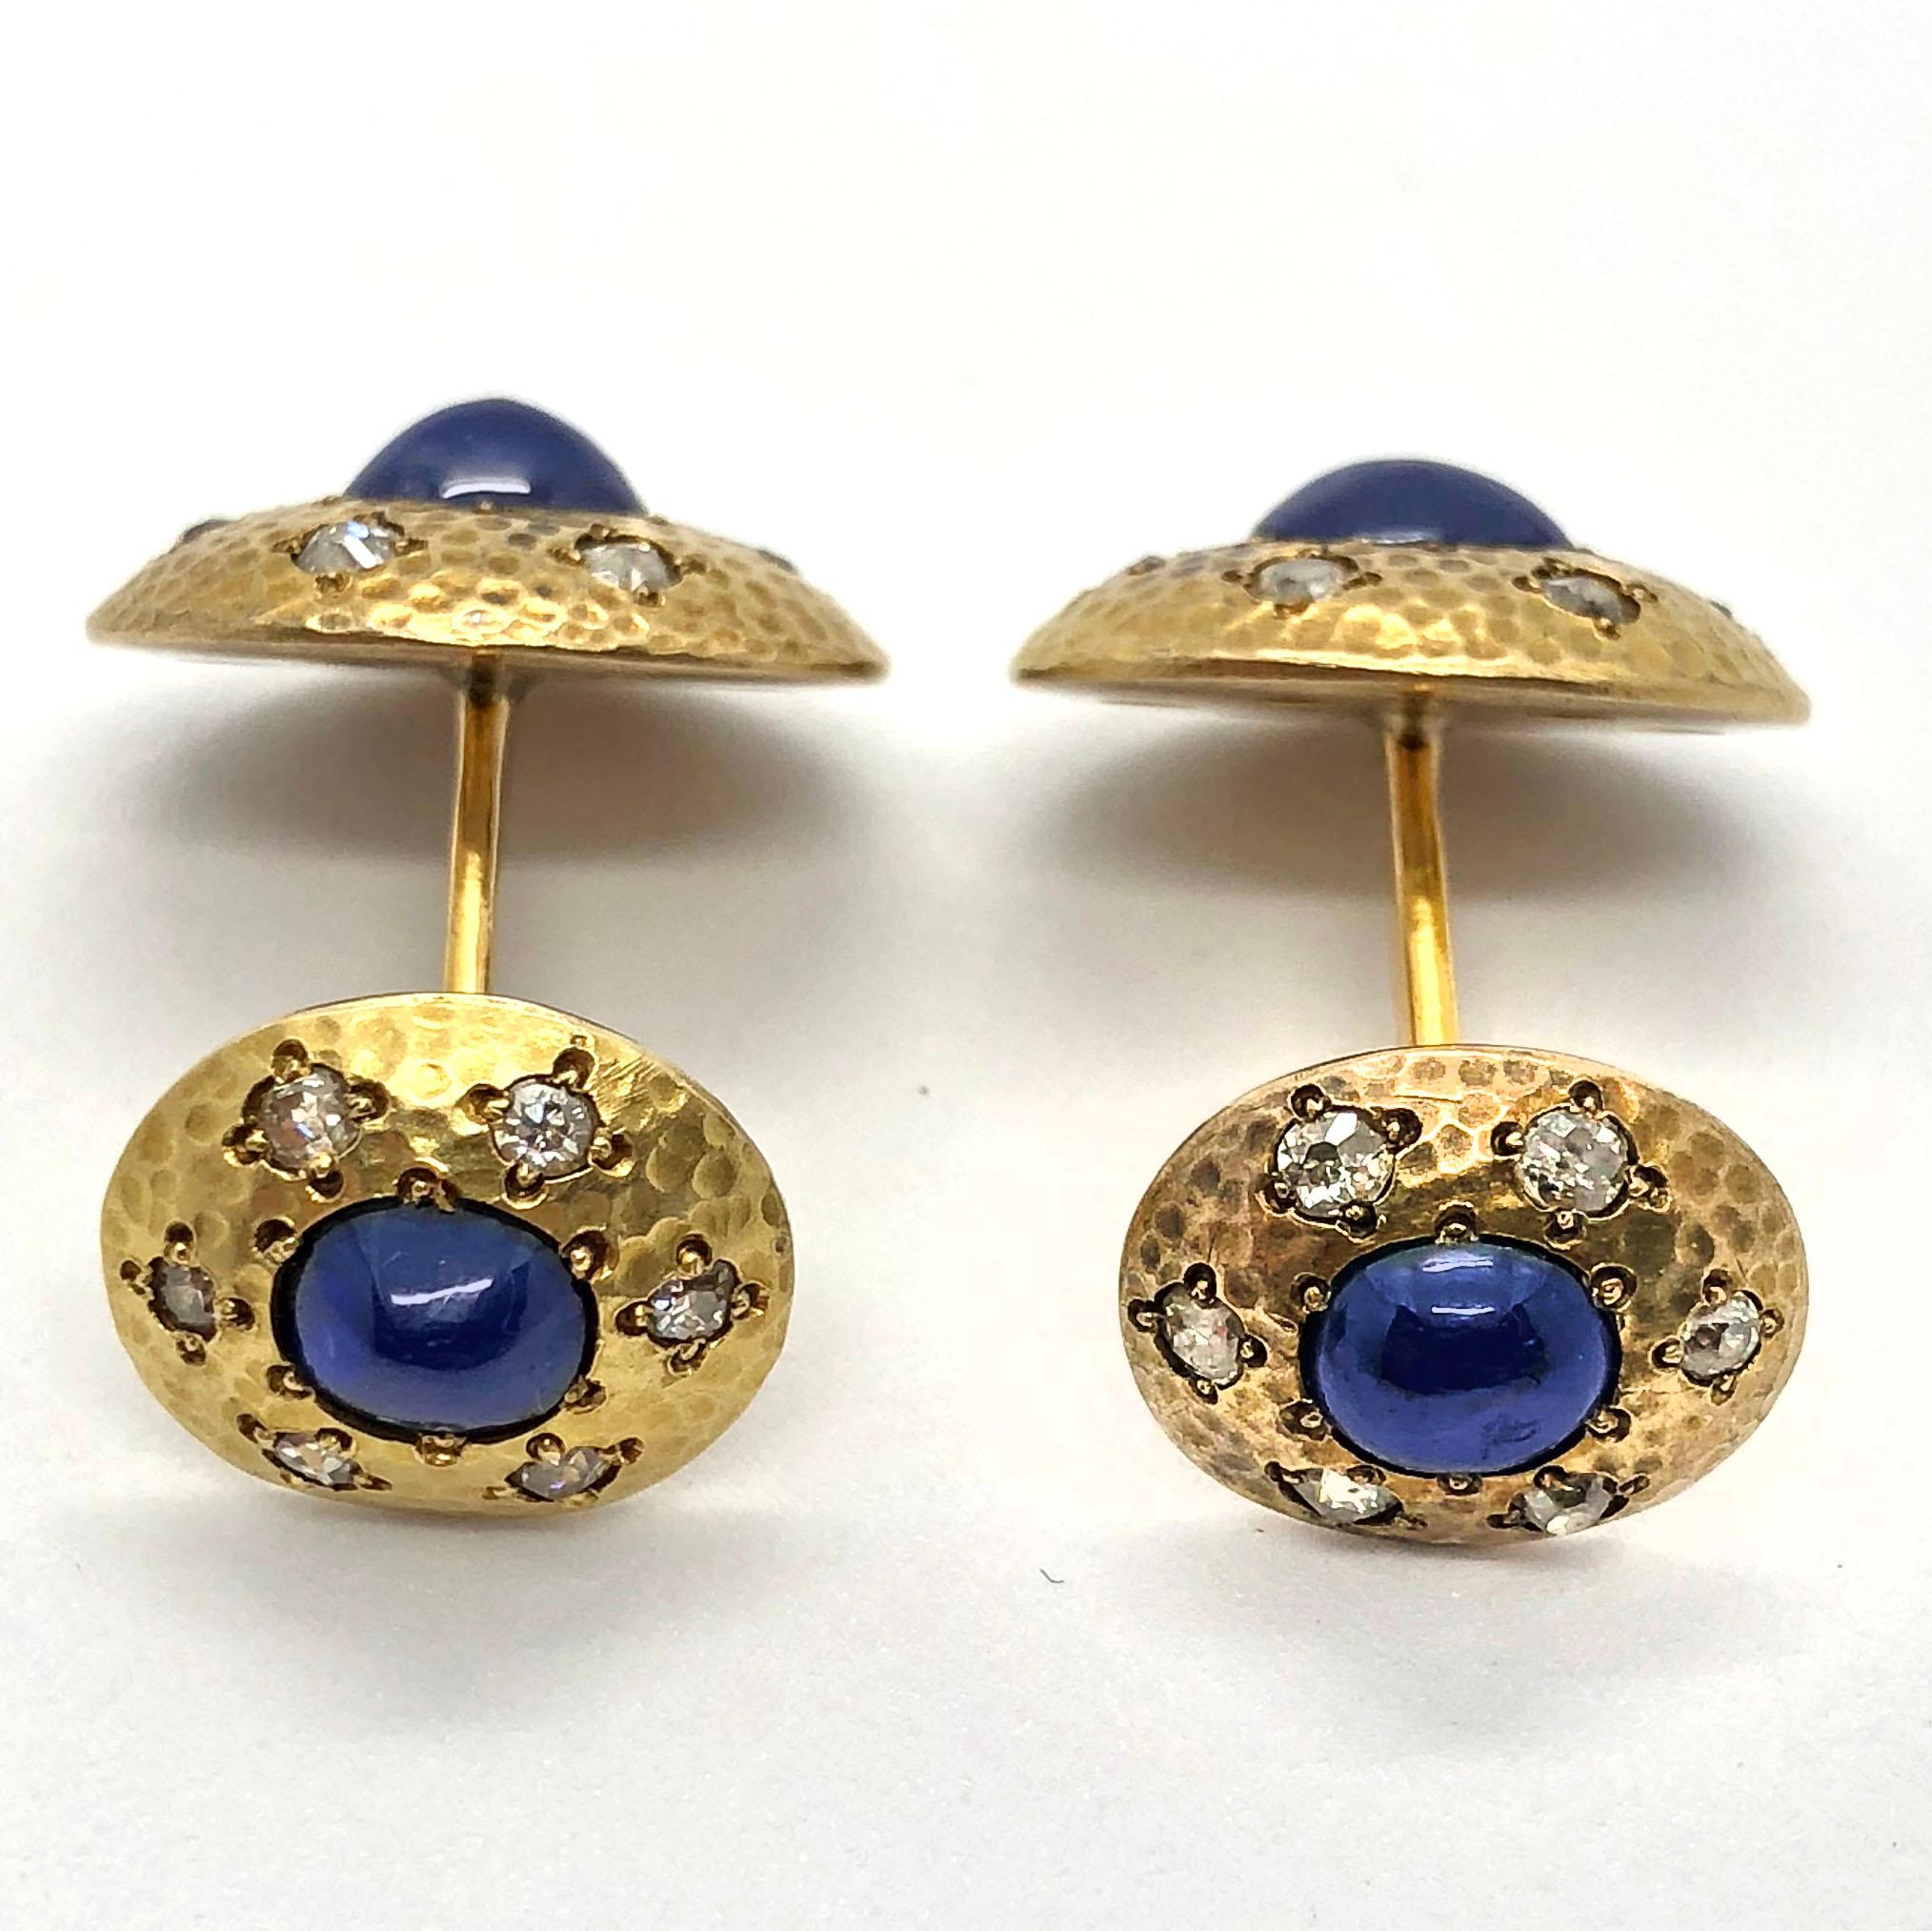 These beautiful cufflinks feature a deep royal blue sapphire cabochon in the centre, which is surround by six old cut diamonds. The smaller part of the cufflink can be turned for a more comfortable wearing.